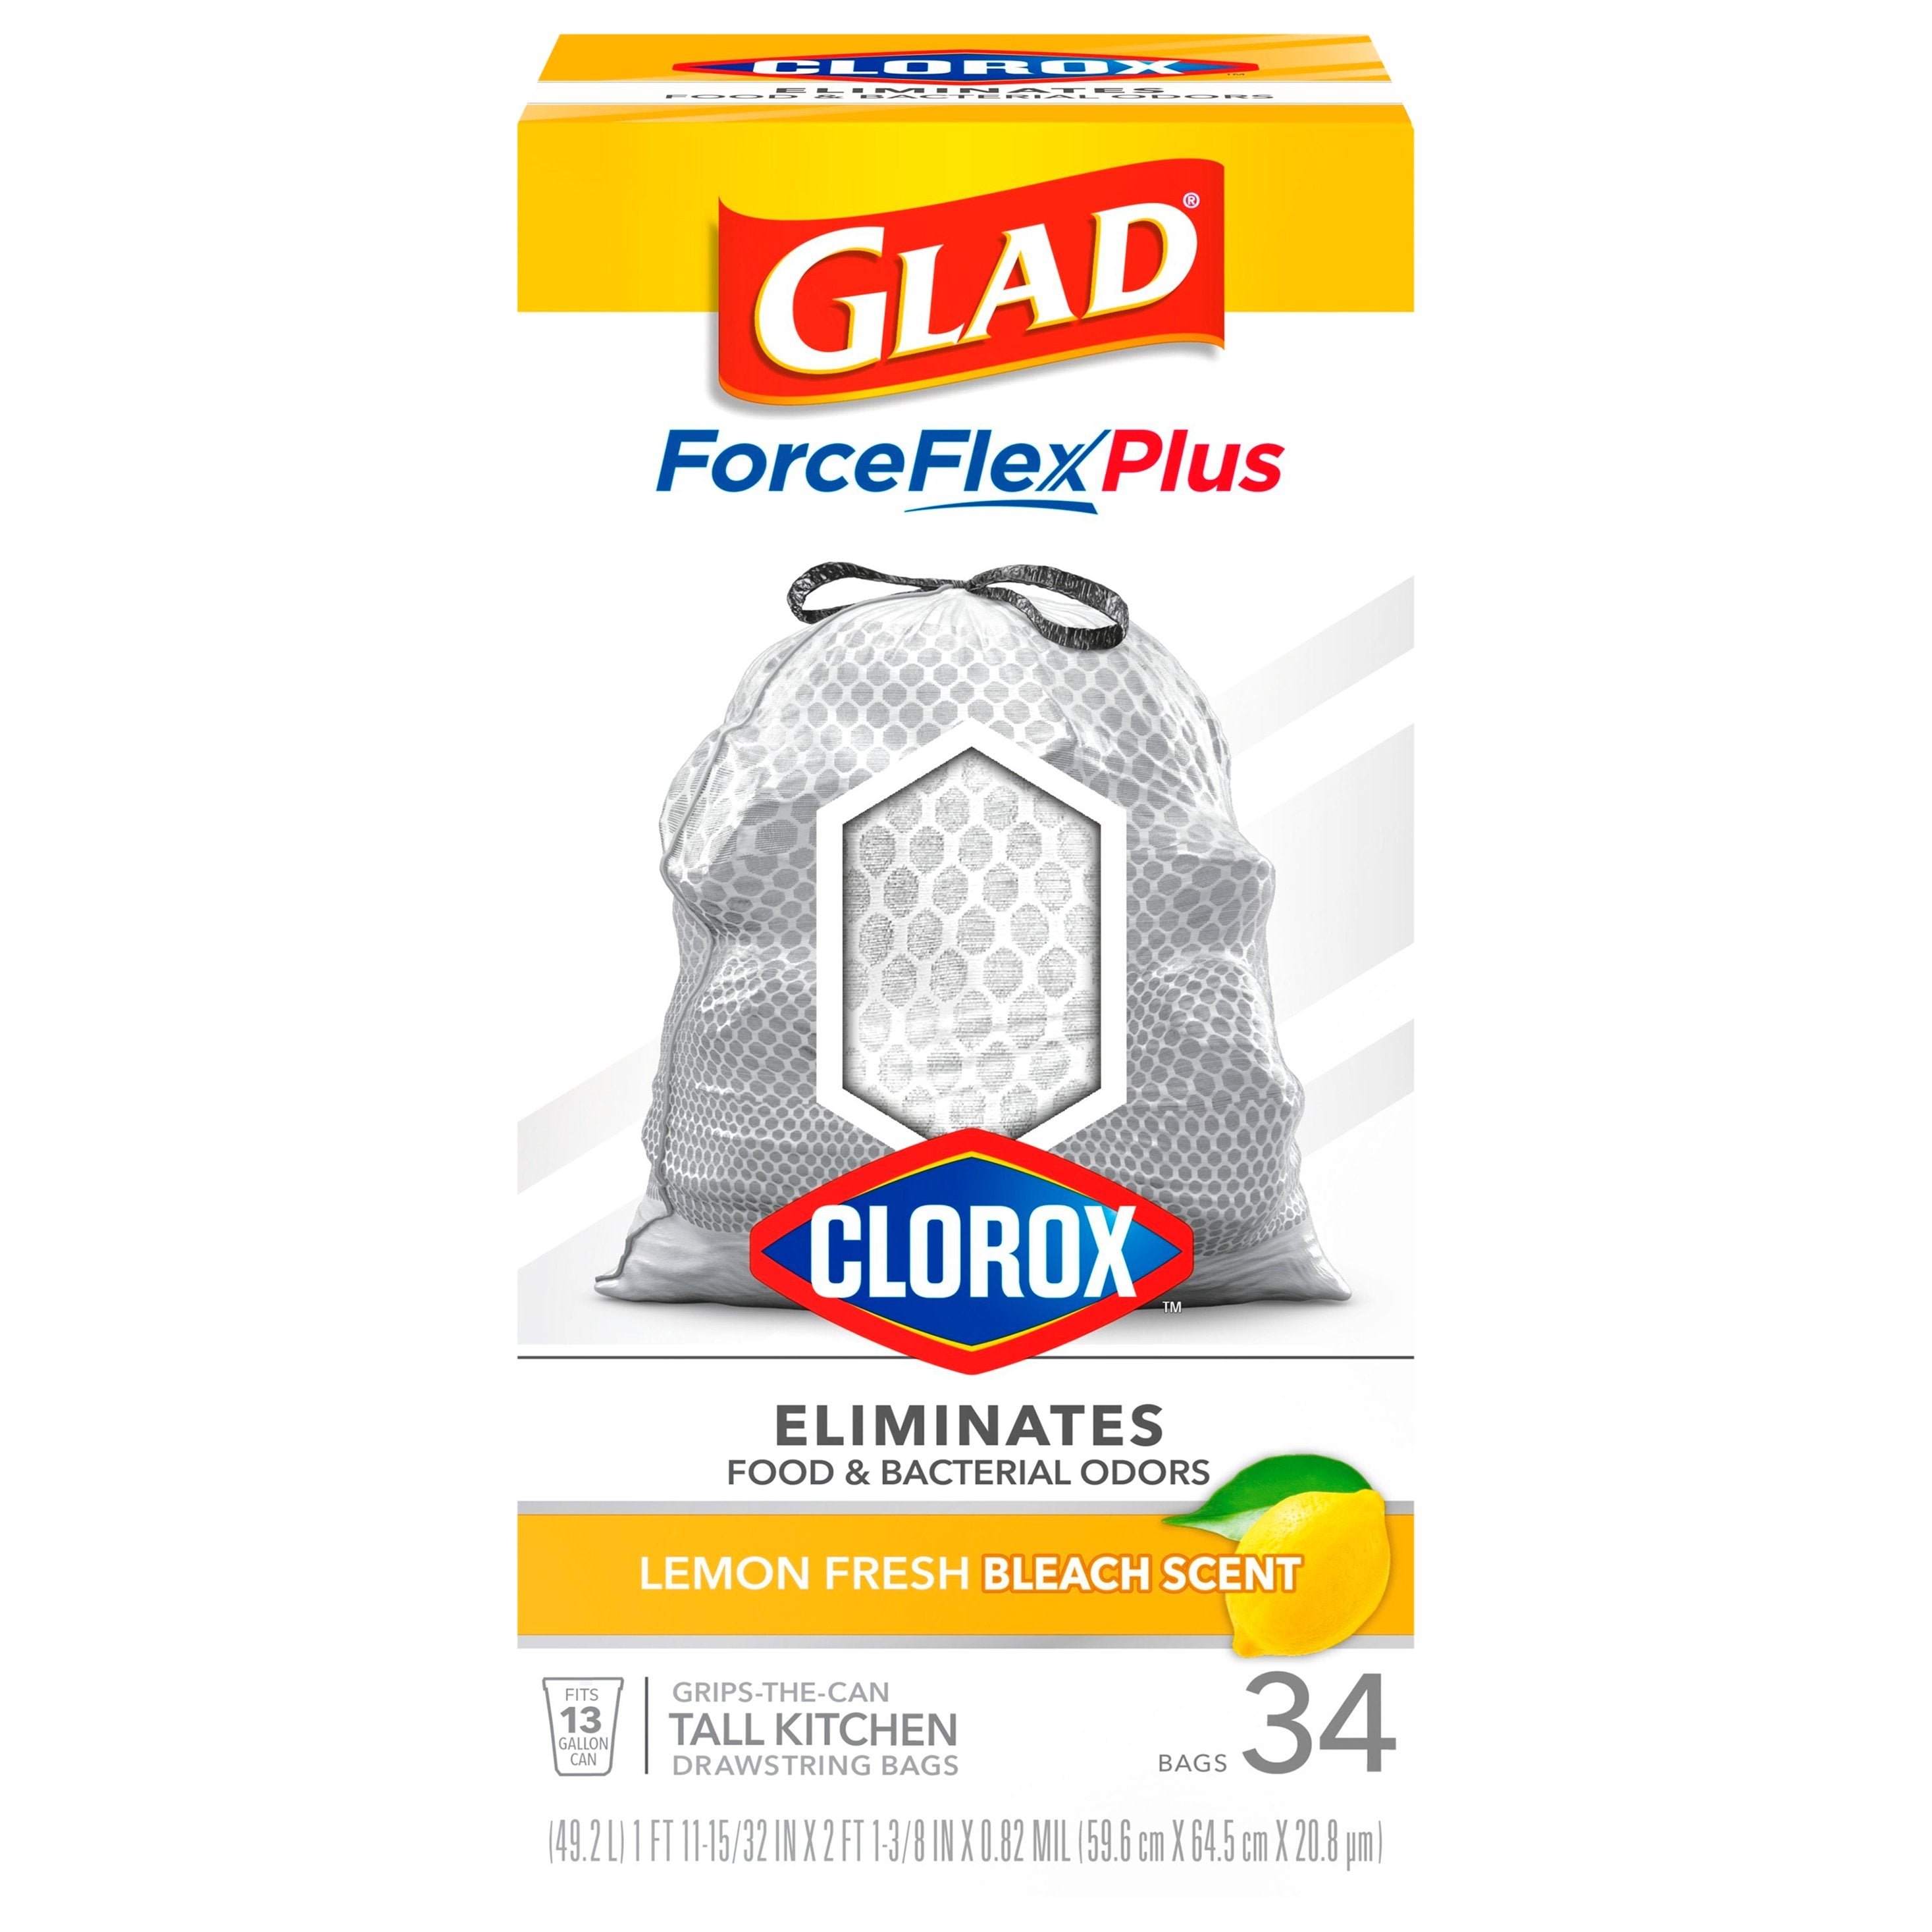 Glad Lunch Containers (6-Pack)